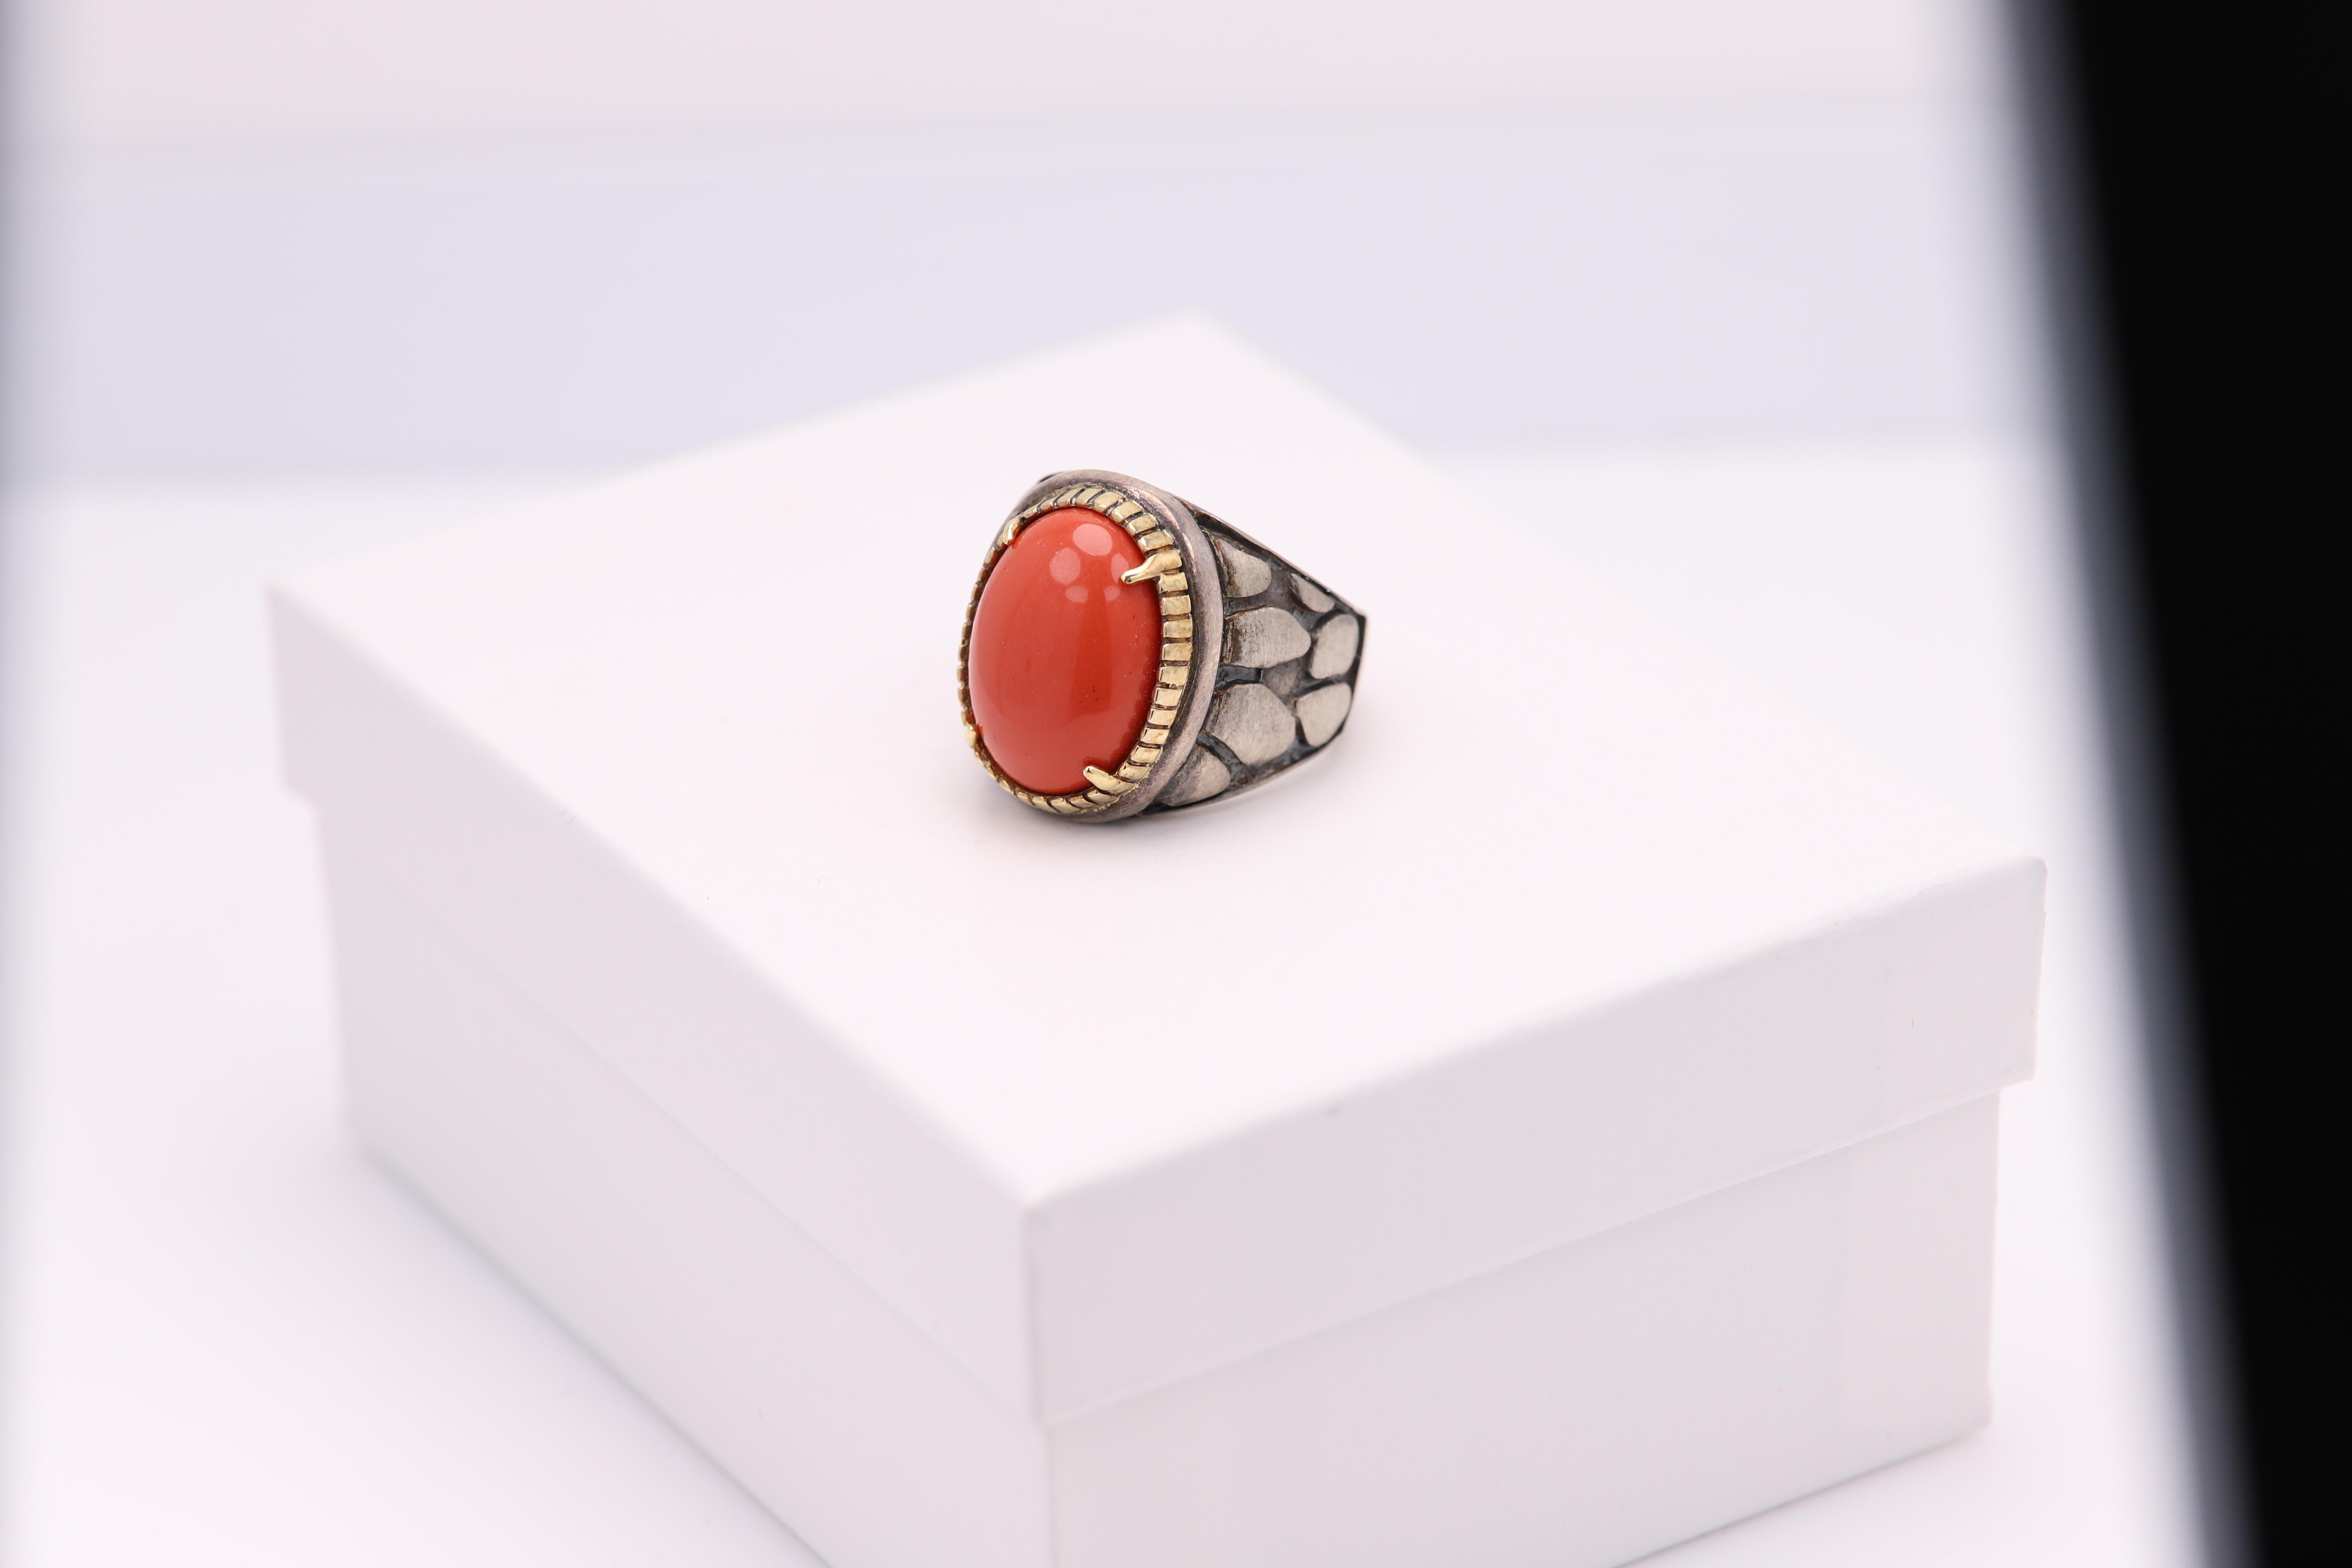 Vintage Ring with a Brilliant Treated Coral stone
Cabochon cut.
The stone is natural but treated with color(it is and was common to do so)
Approx size 21 x 12 mm
Mostly Sterling Silver 925 and the bezel is solid 18k yellow gold.
Well craftsmanship -